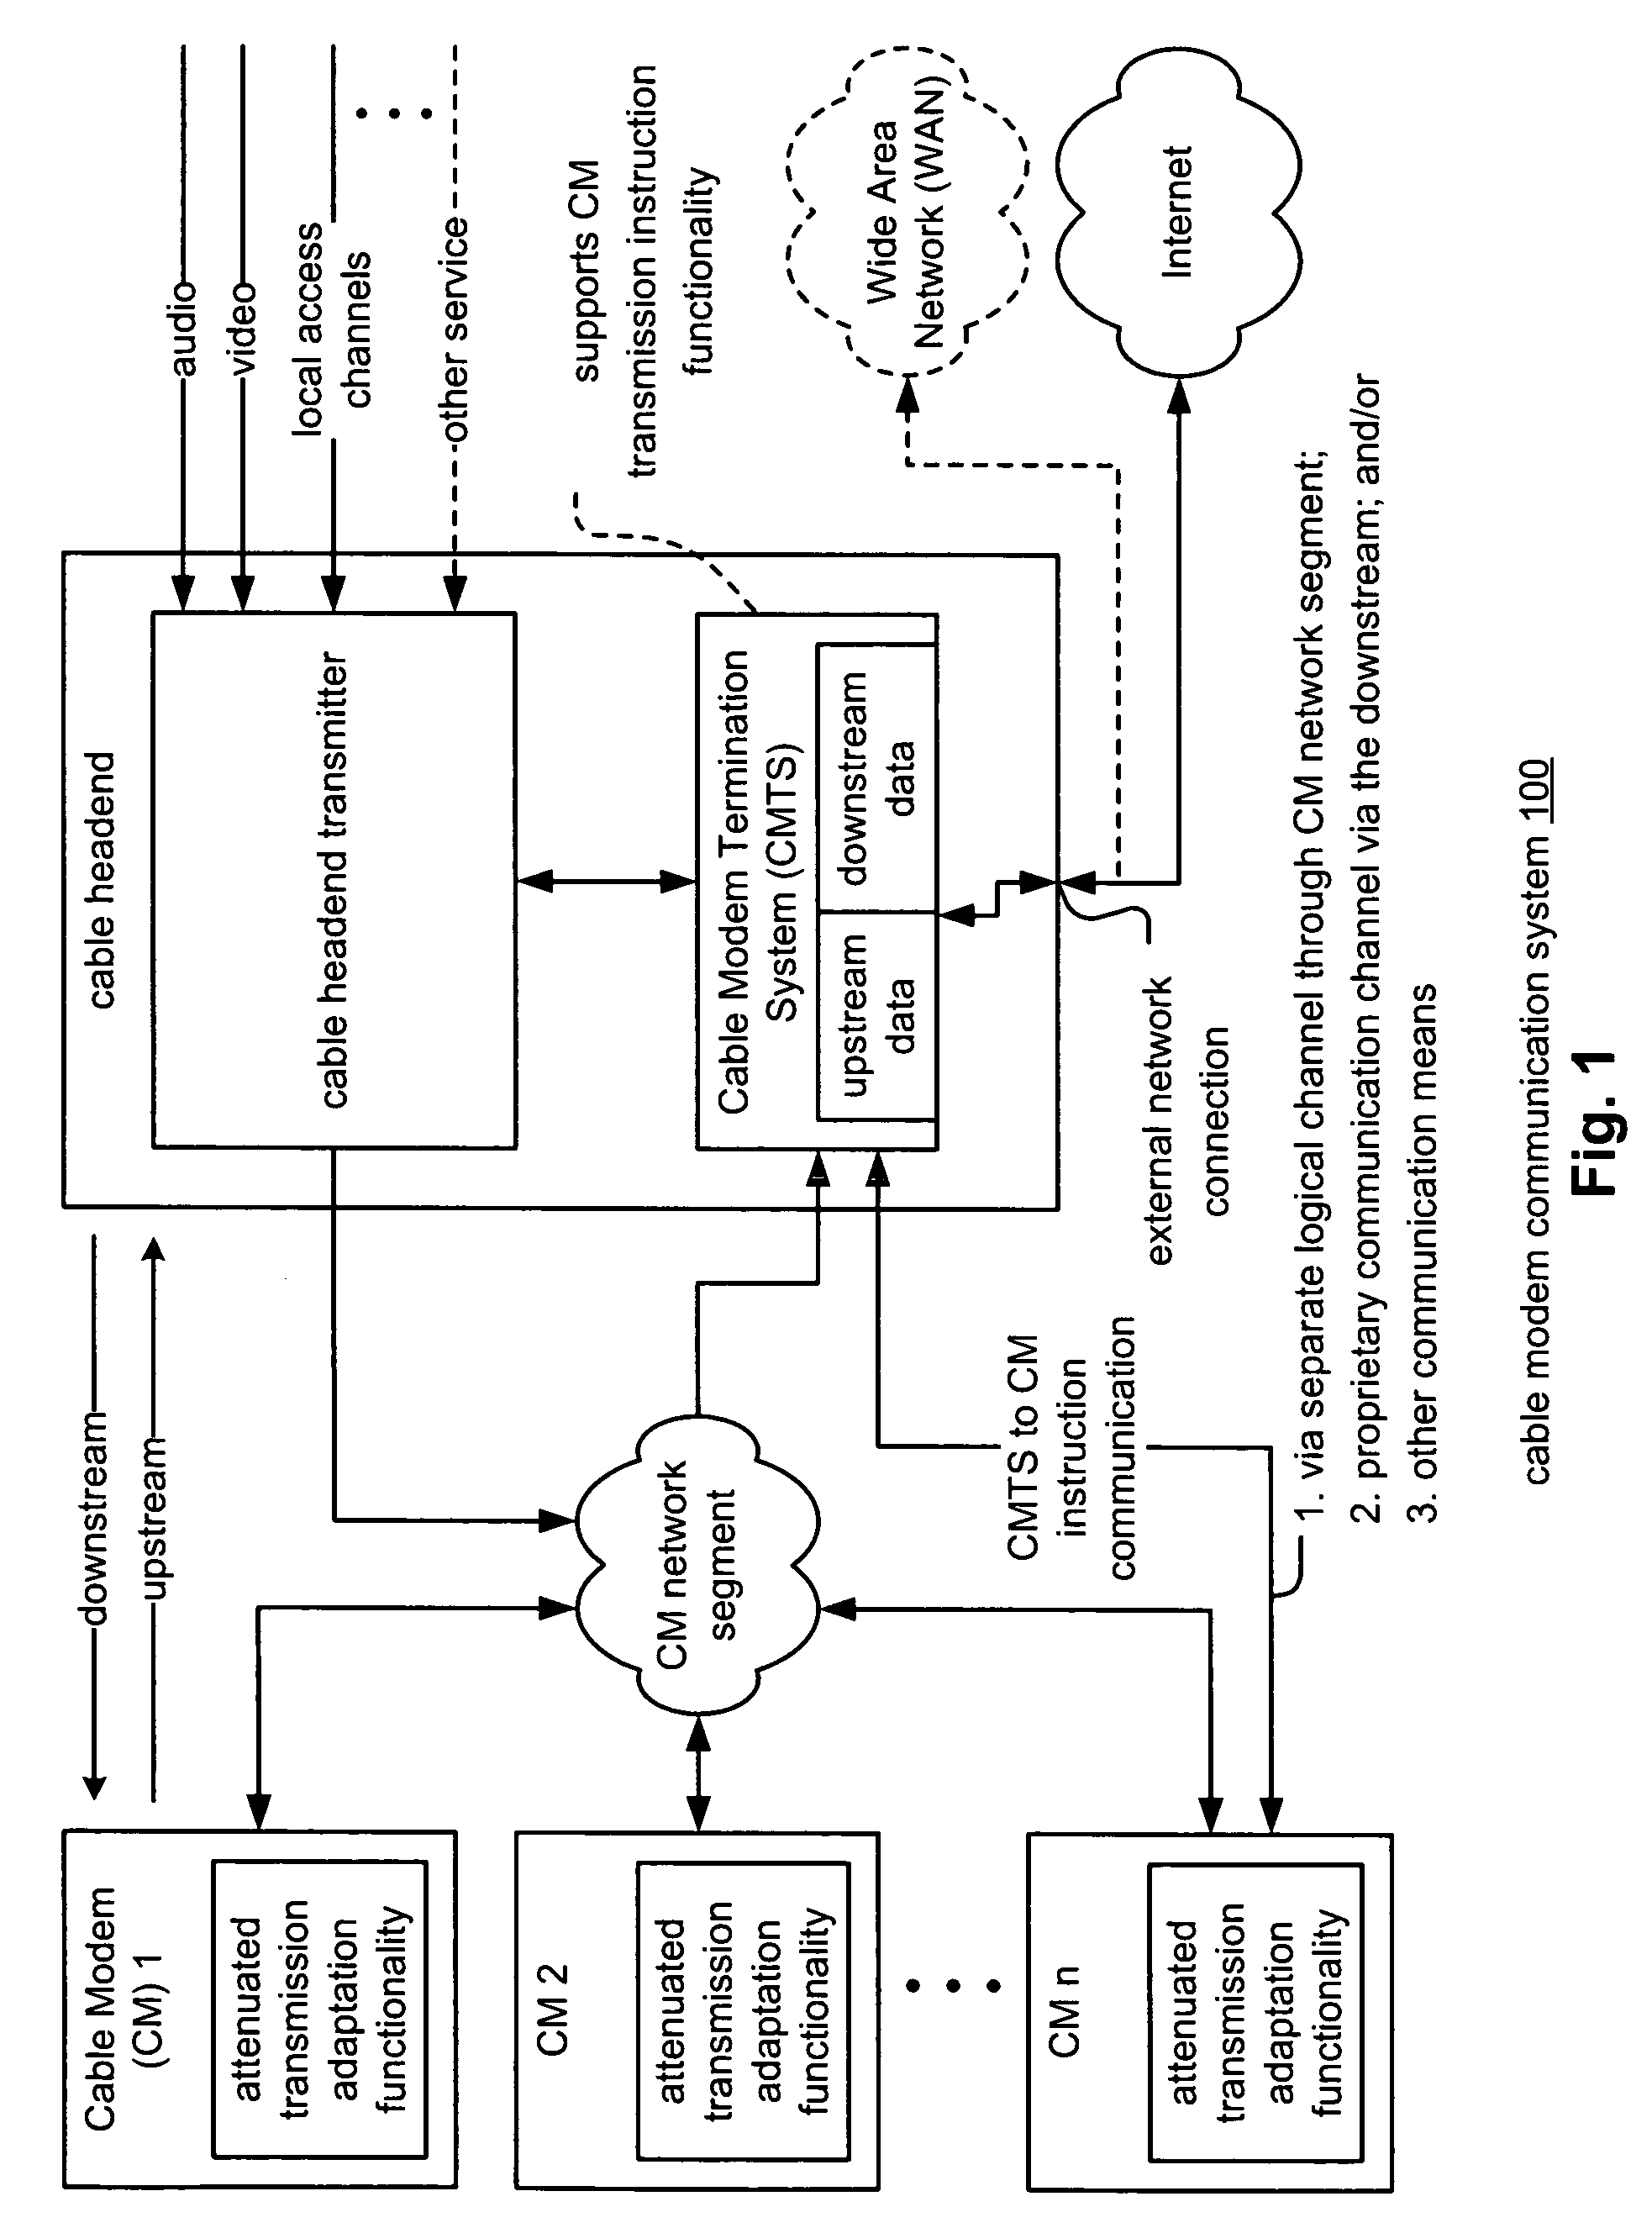 Ranging and registering cable modems under attenuated transmission conditions